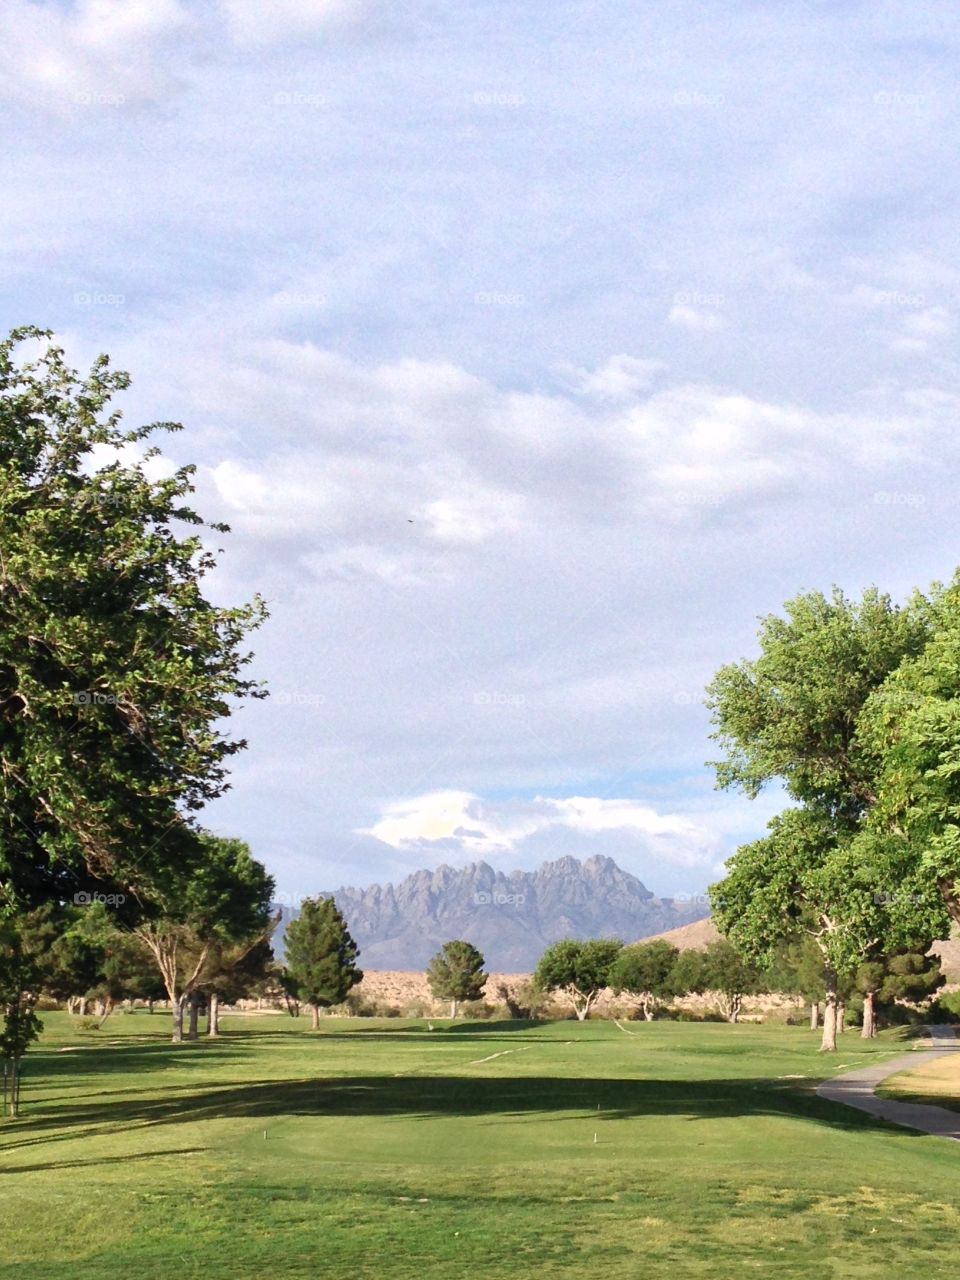 View of the Organ Mountains in Las Cruces, NM.